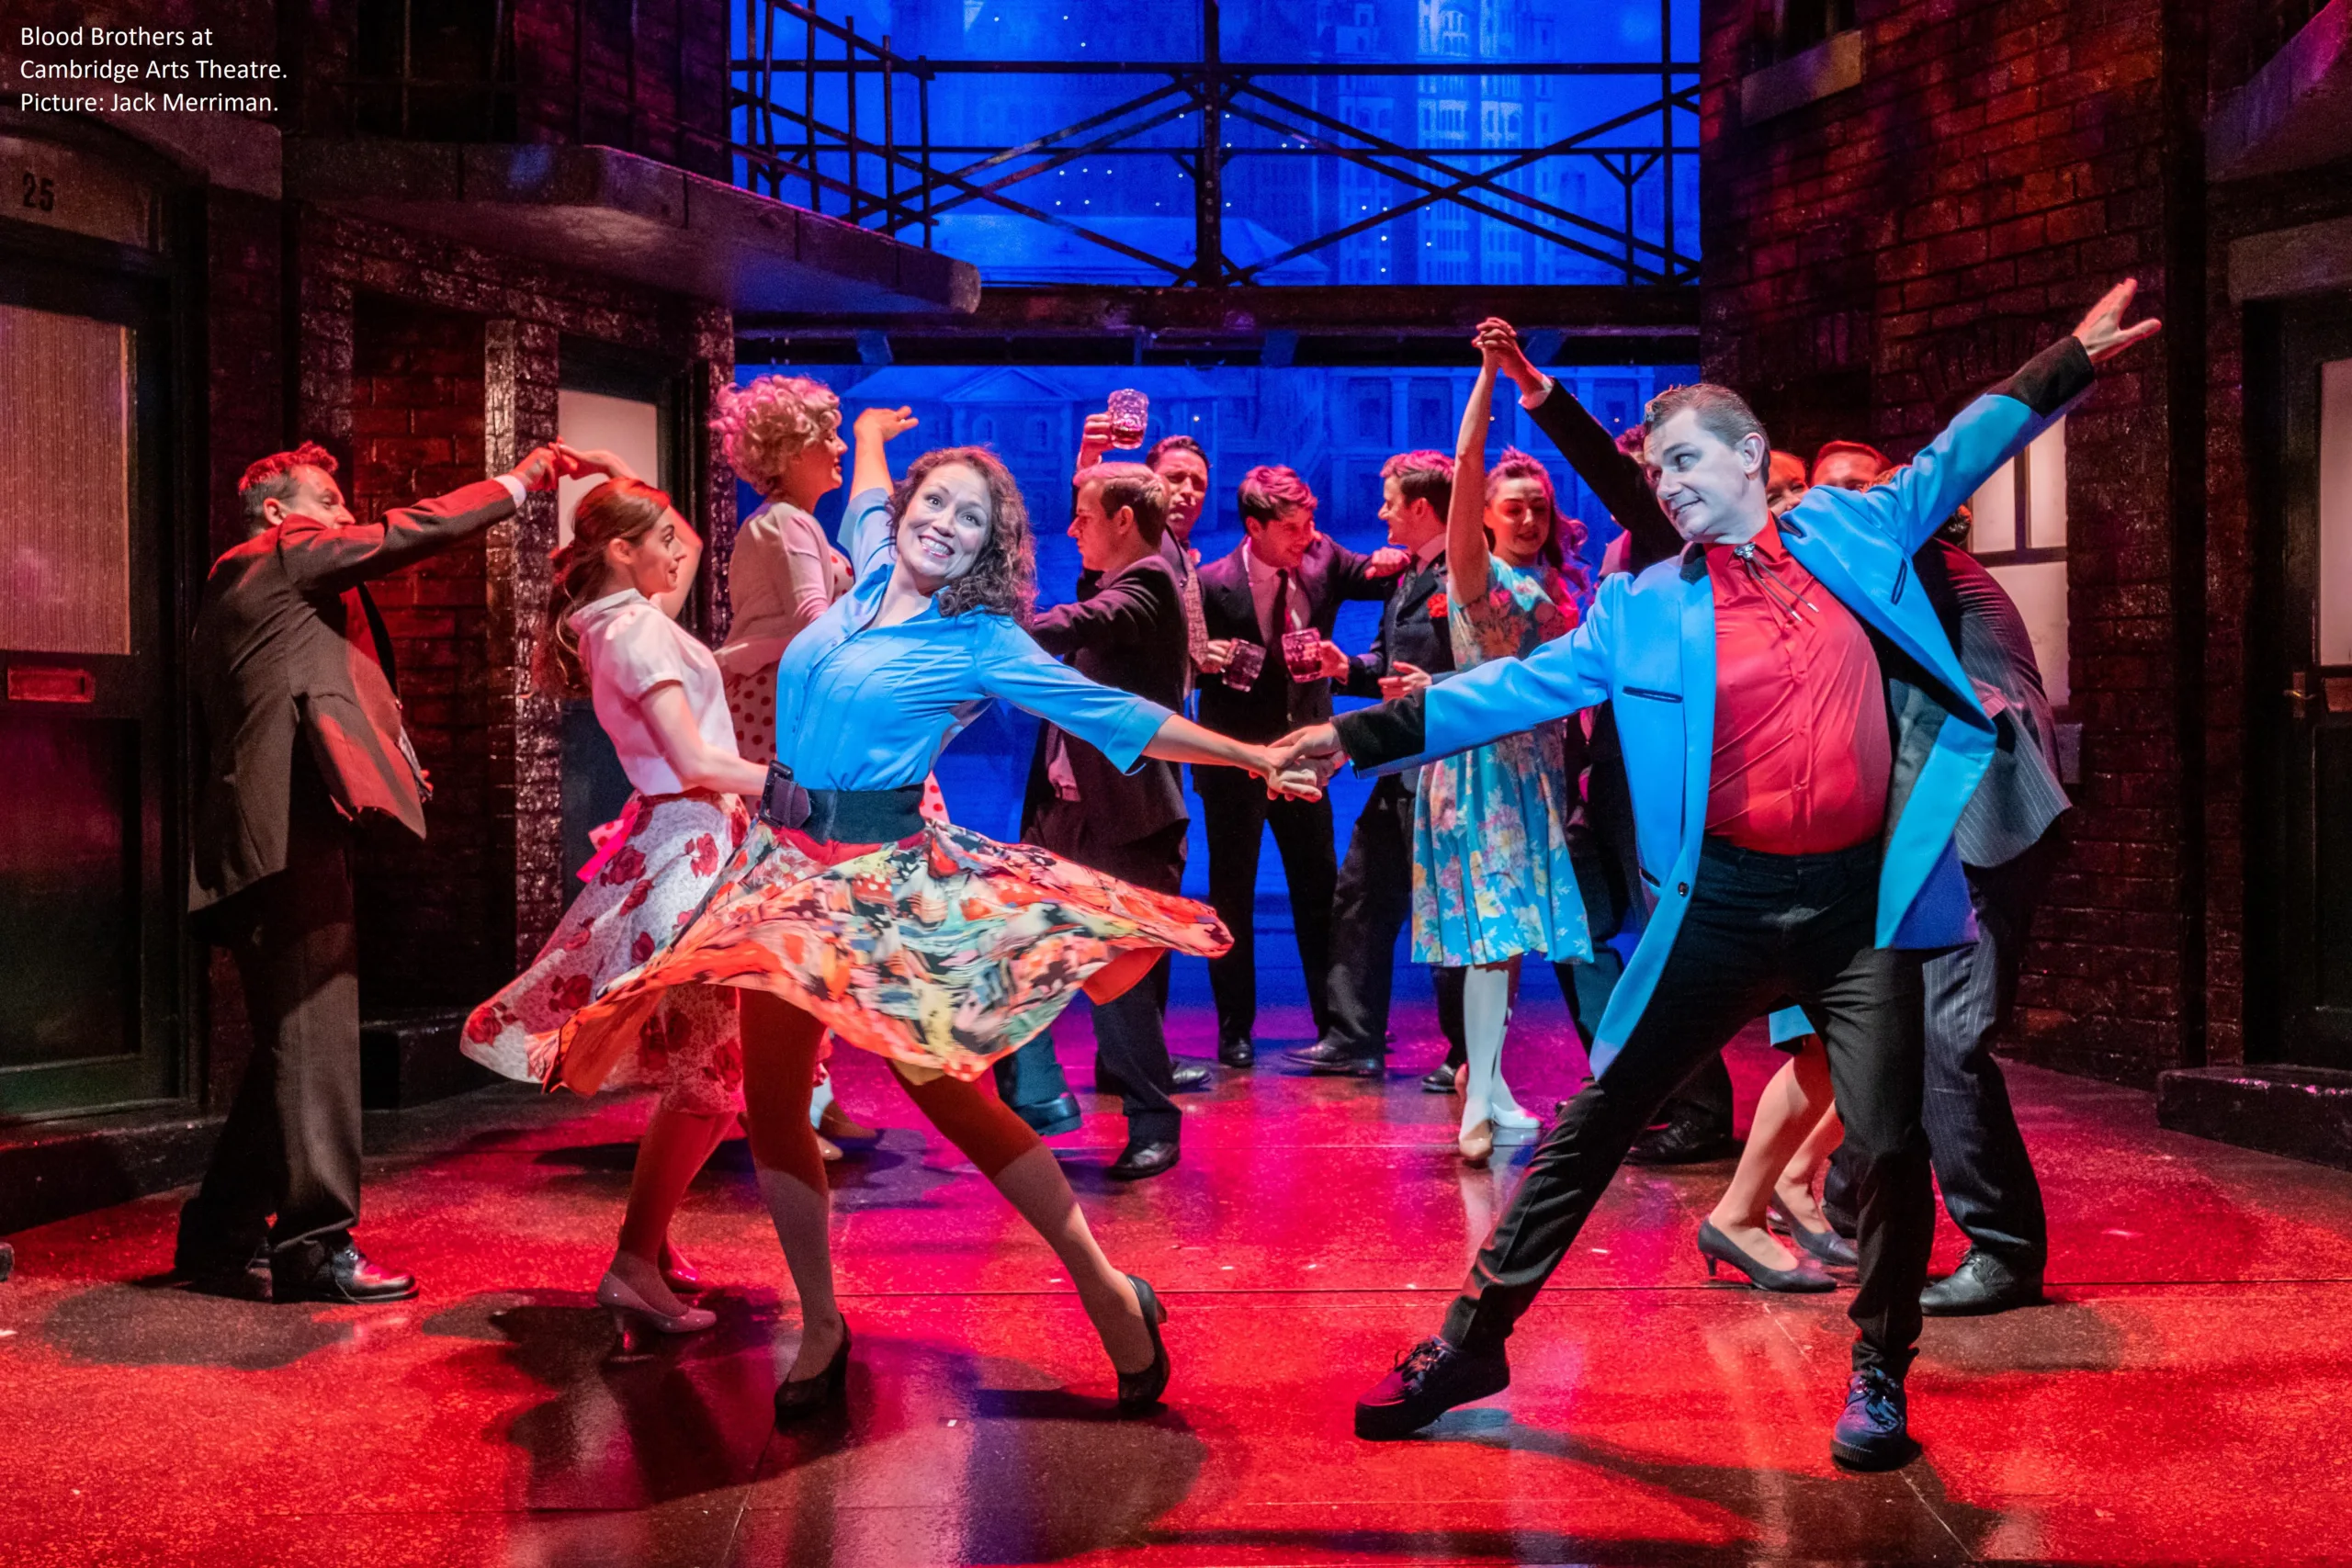 The comic timing and the humour of the performances kept the show and the audience buoyant. Blood Brothers is at Cambridge Arts Theatre until Saturday August 4.